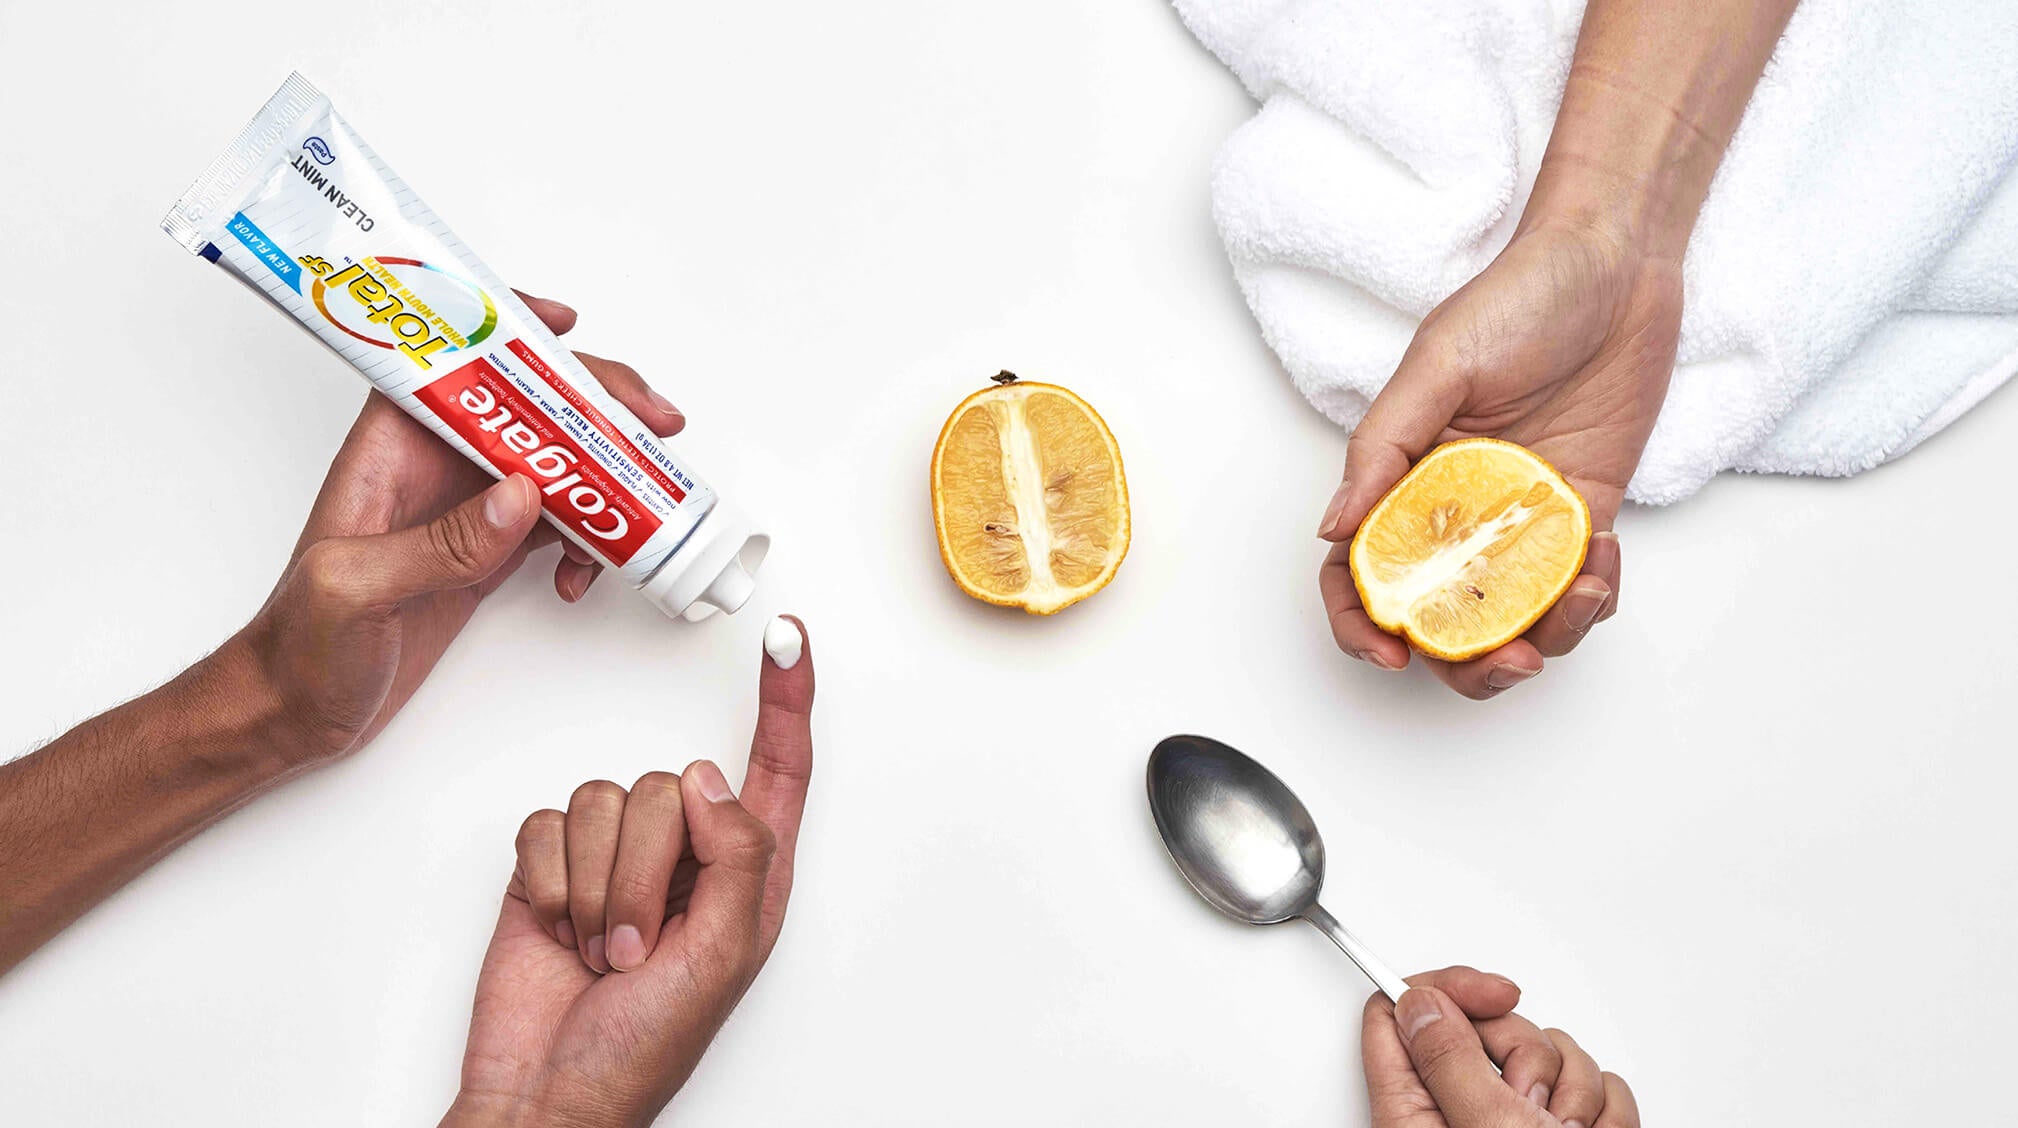 Hands holding toothpaste, lemons, and hot spoon.